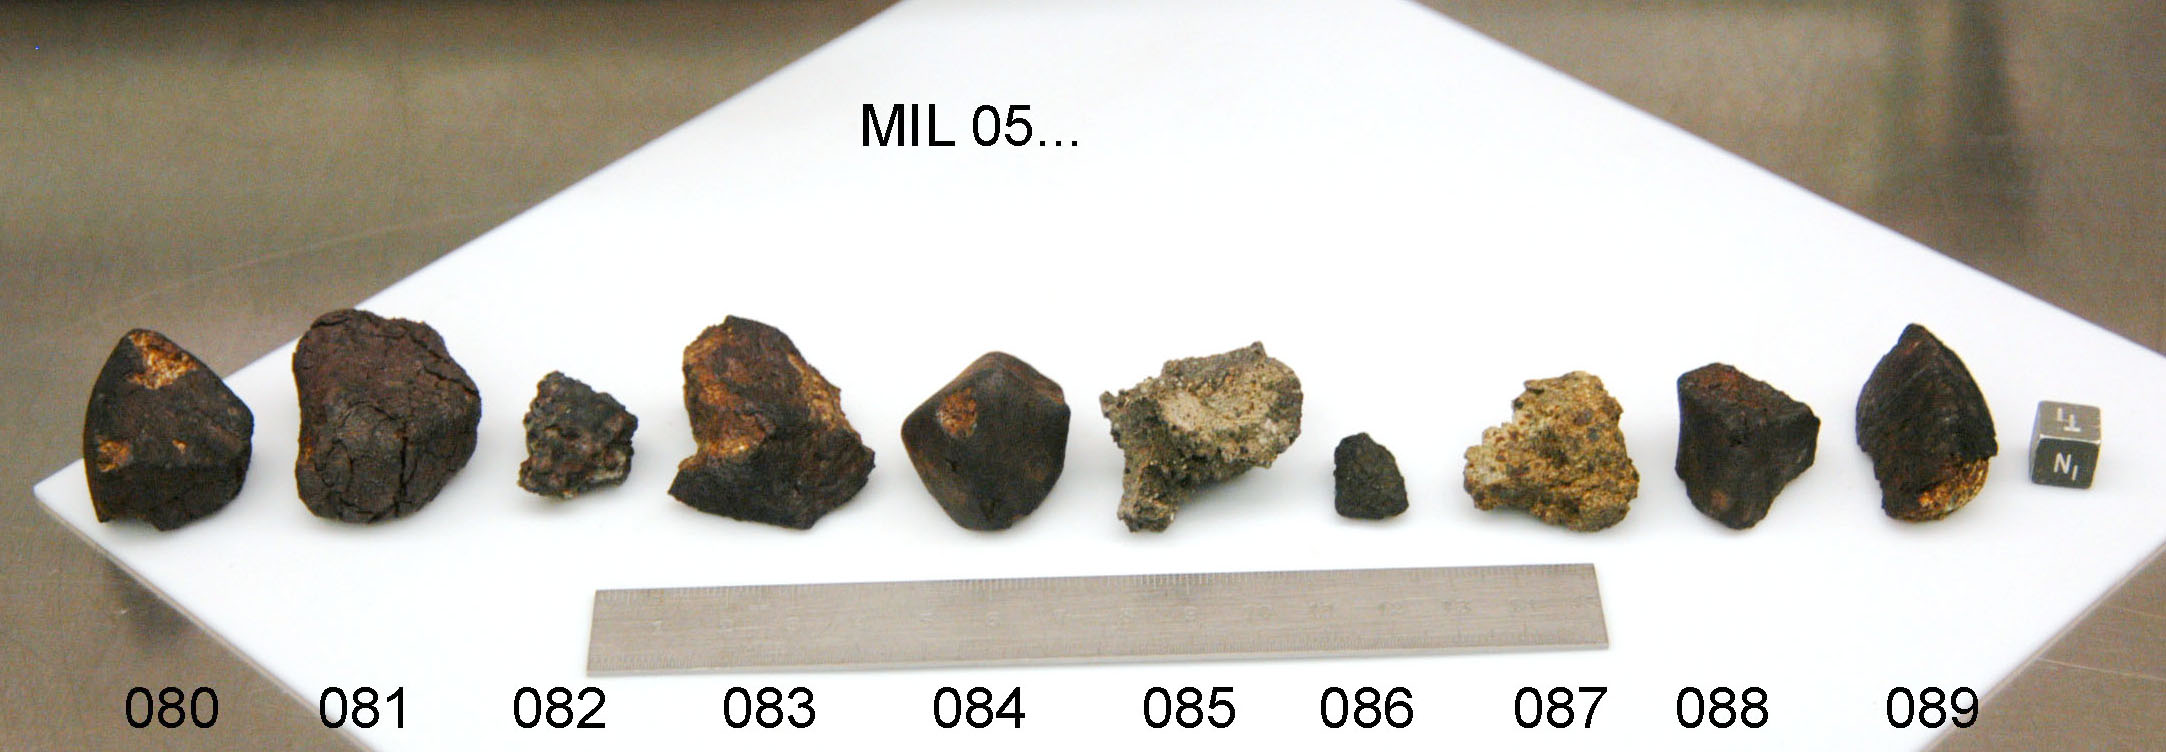 Lab Photo of Sample MIL 05082 Showing North View